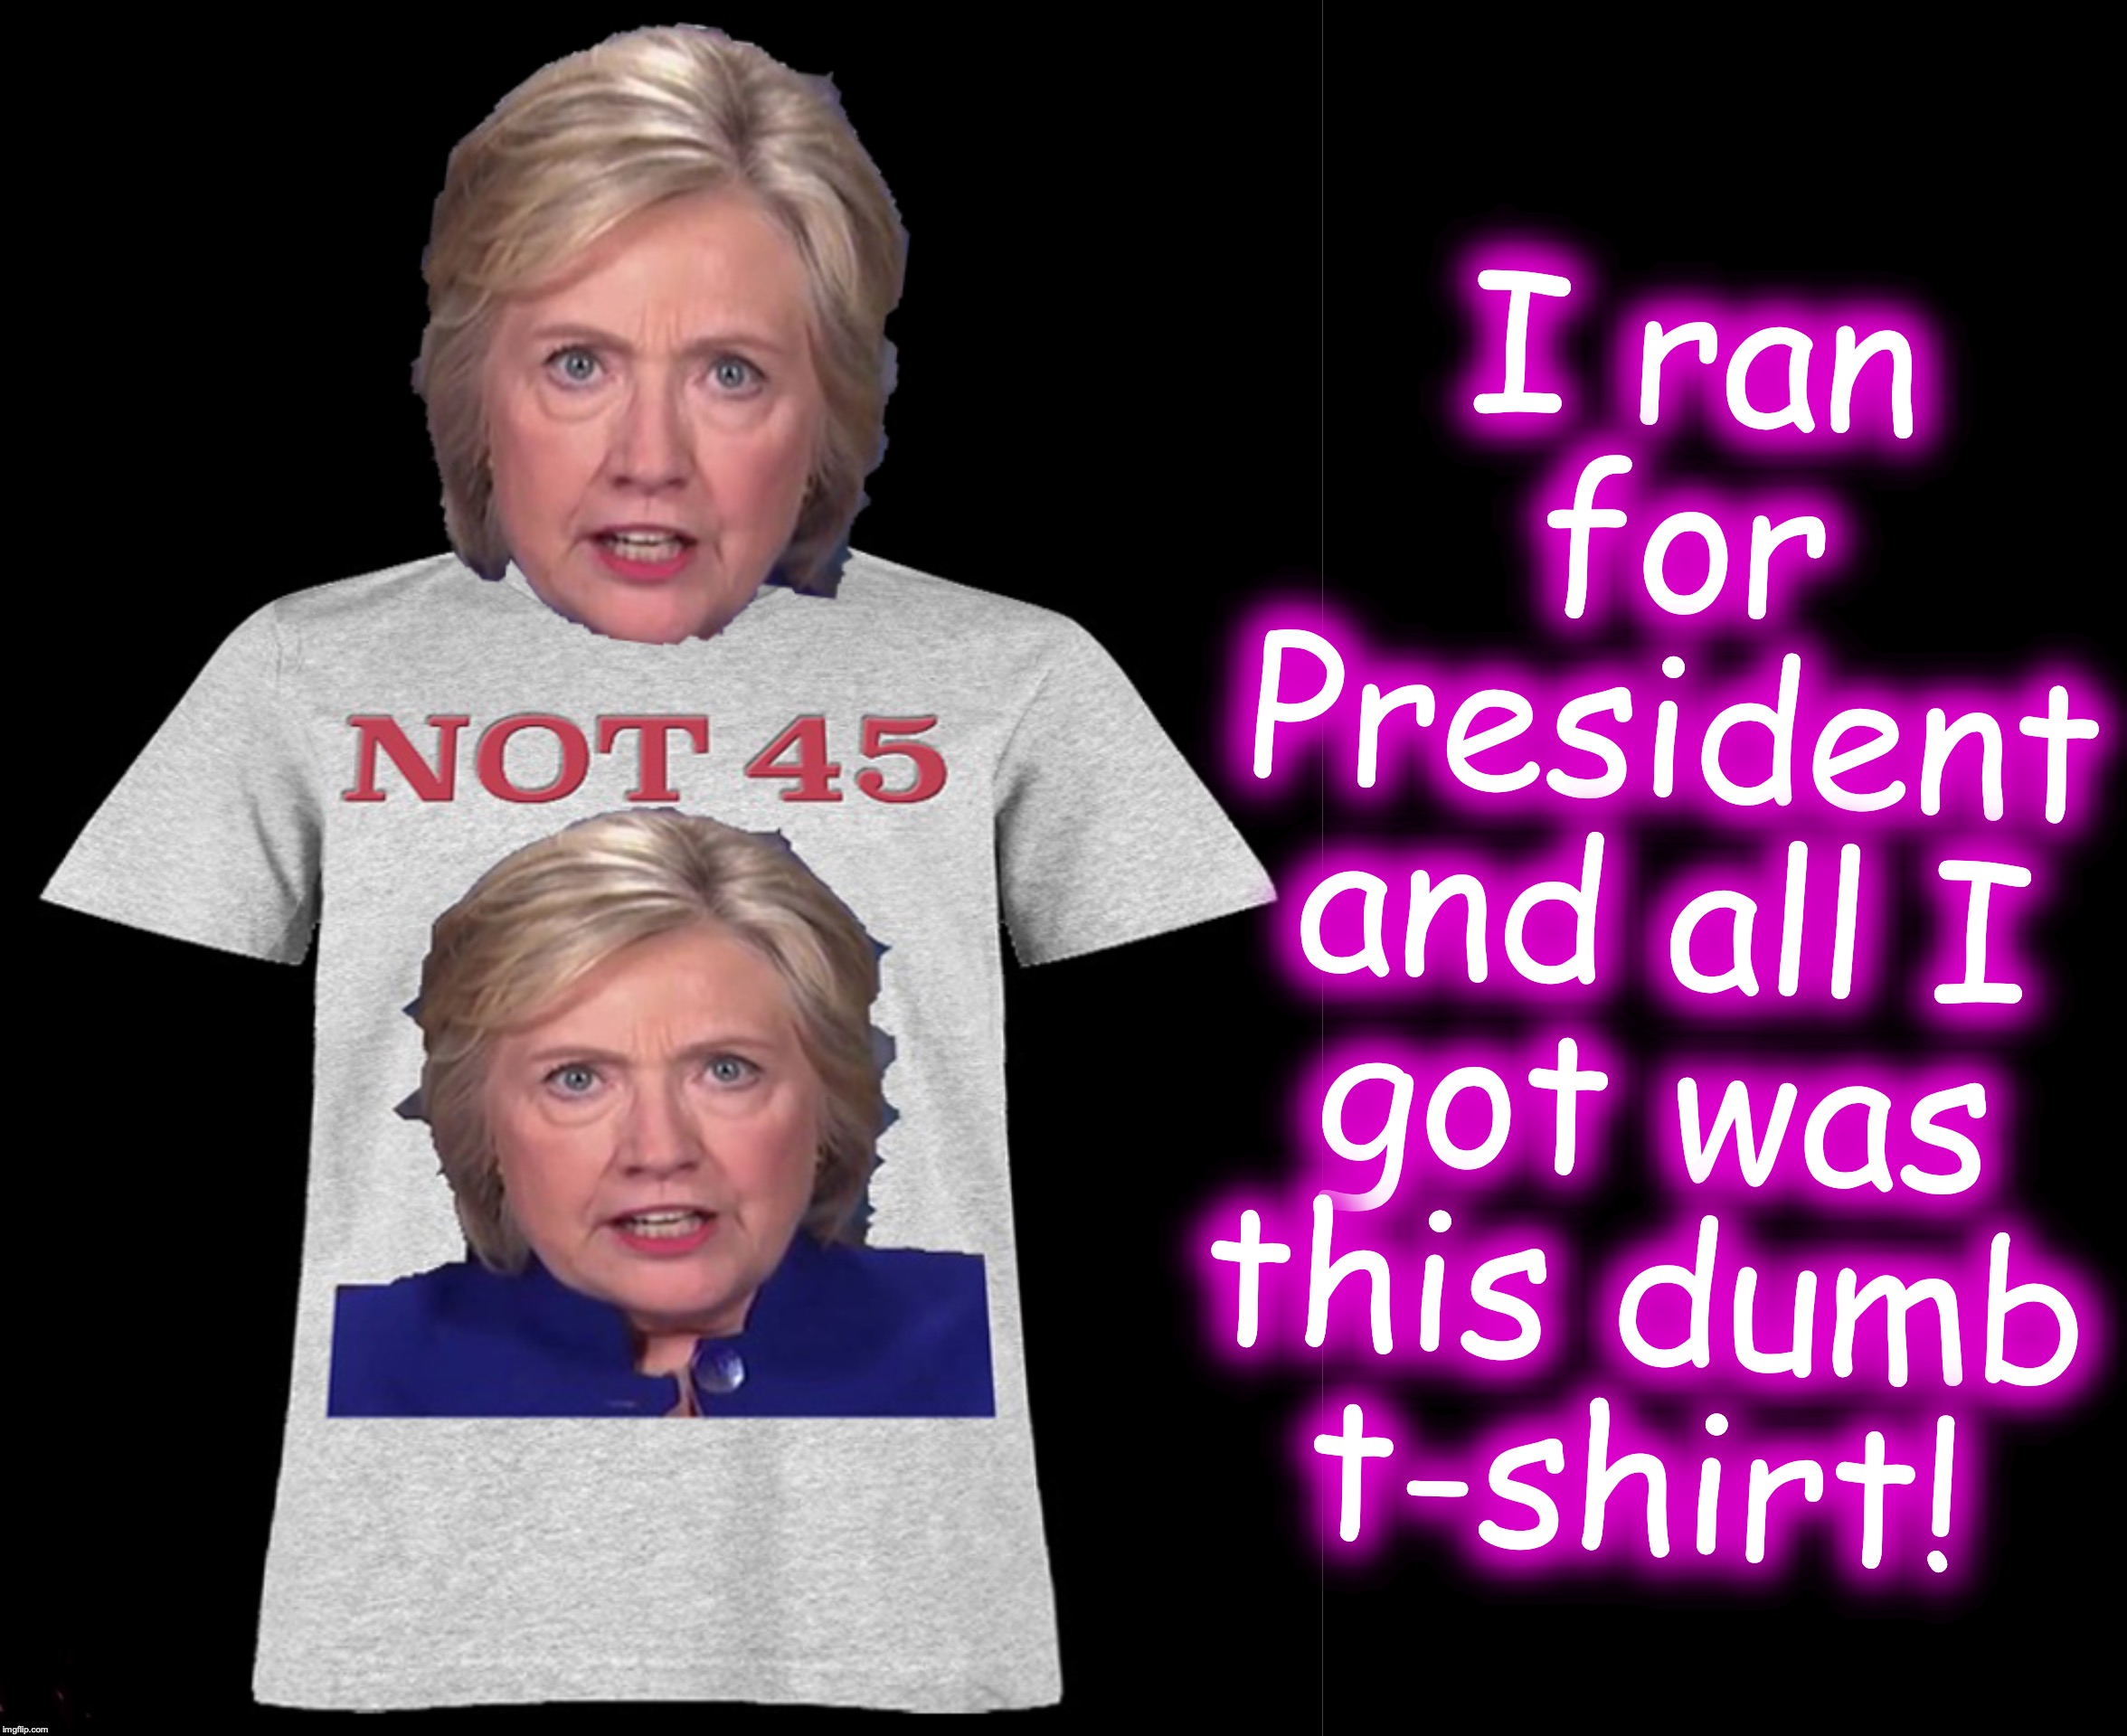 I ran for President and all I got was this dumb t-shirt! | image tagged in hillary | made w/ Imgflip meme maker